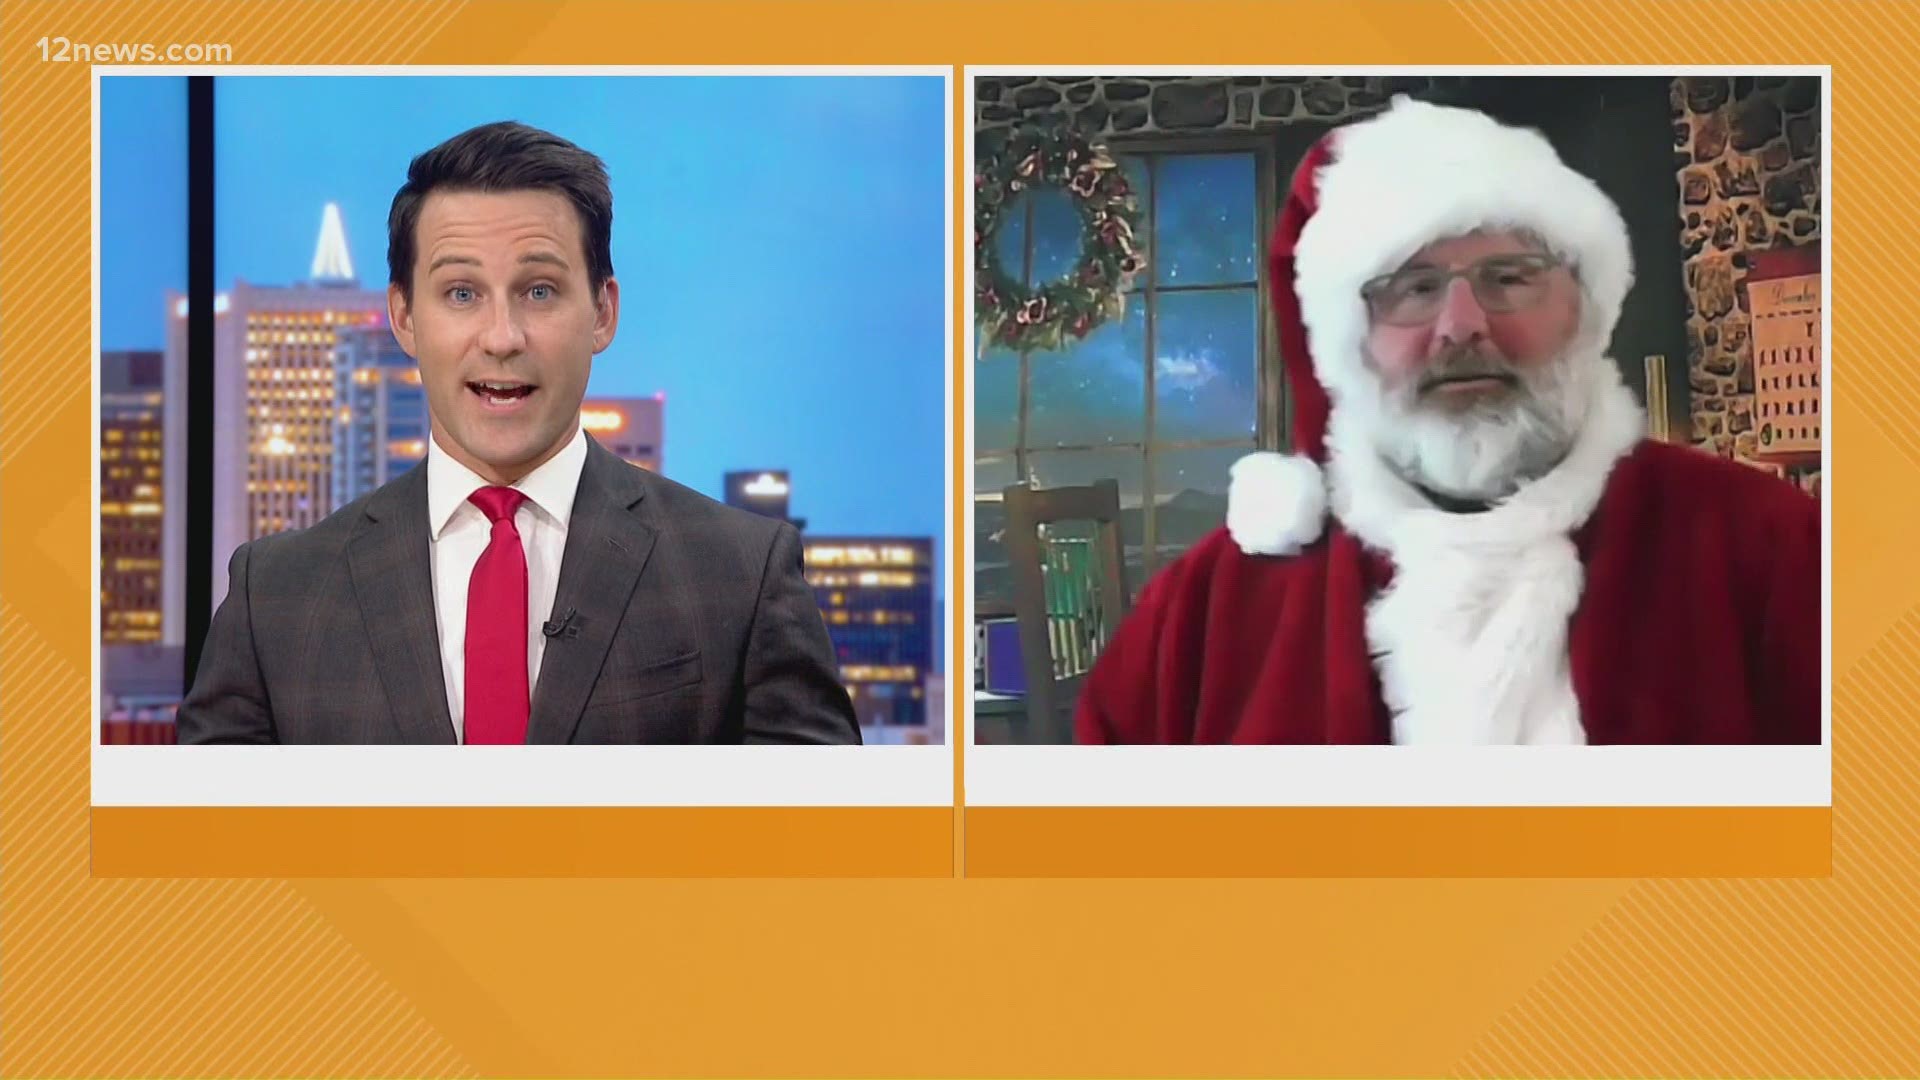 Jolly old St. Nick created a Zoom account to let Arizona know he’s still bringing presents.